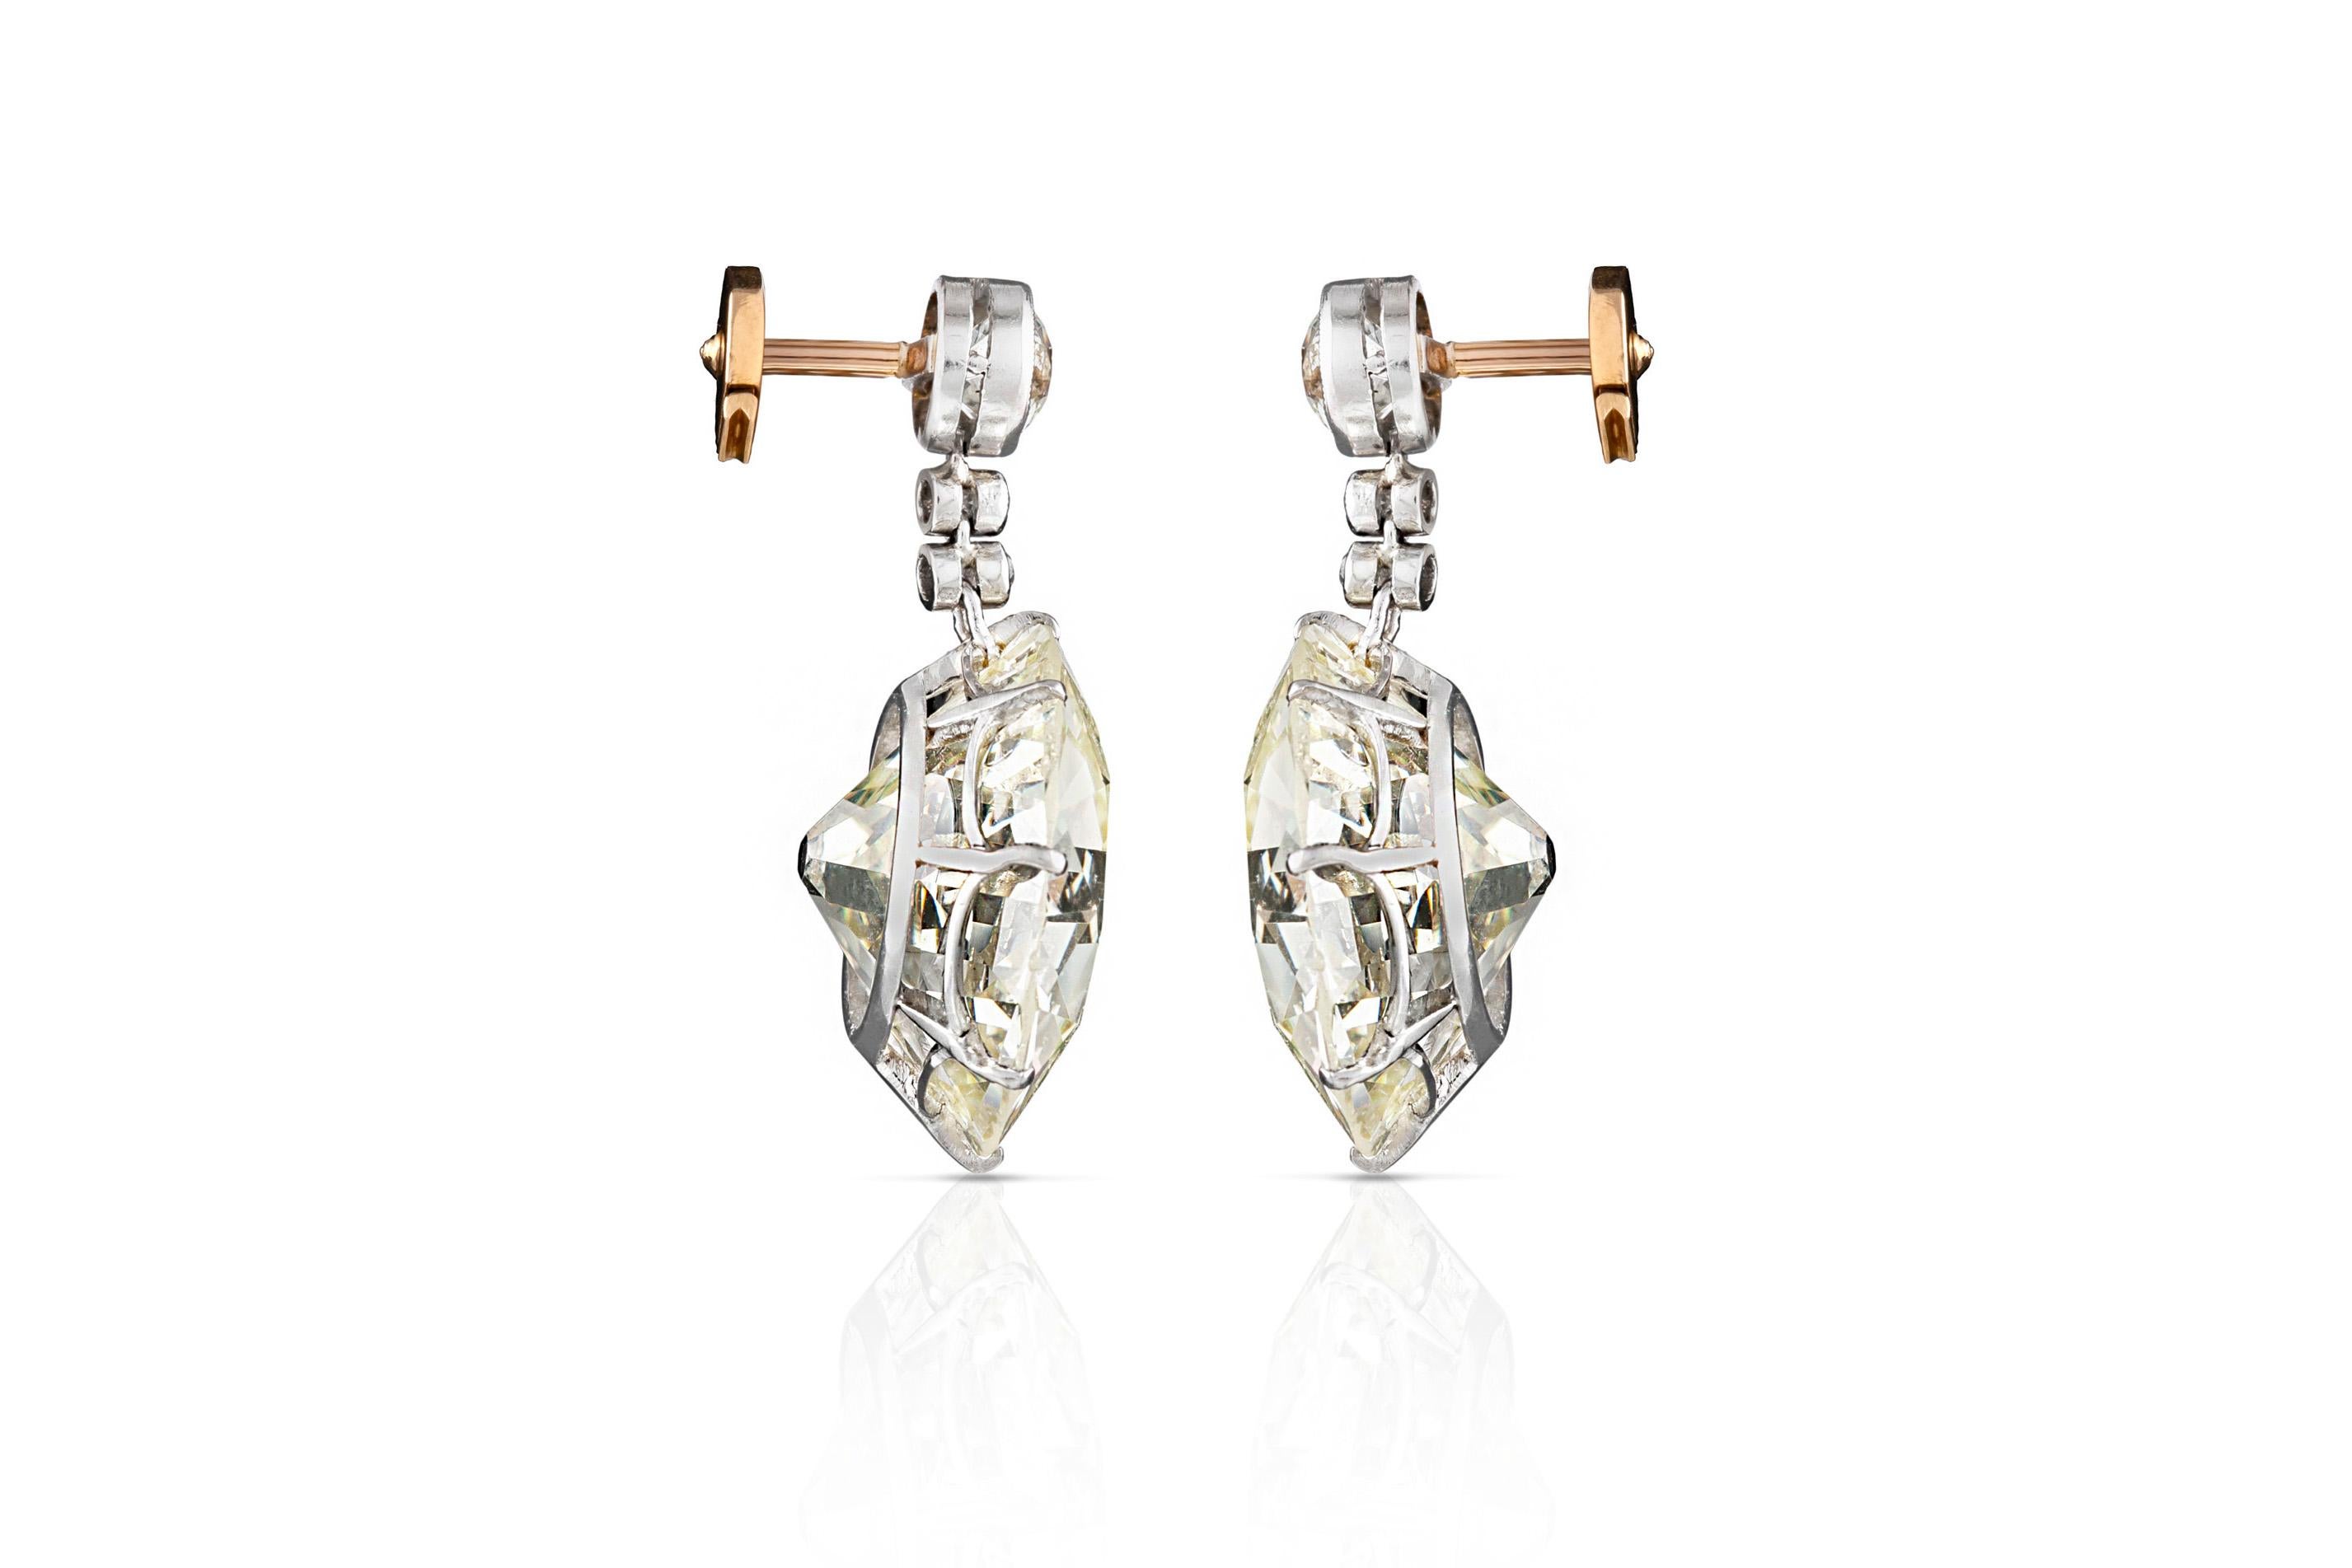 Antique, Edwardian diamond, drop earrings, finely crafted in platinum and 18 k yellow gold, featuring 15.88 carat and 15.95 carat, Old European cut diamonds at the bottom. Circa 1910's.